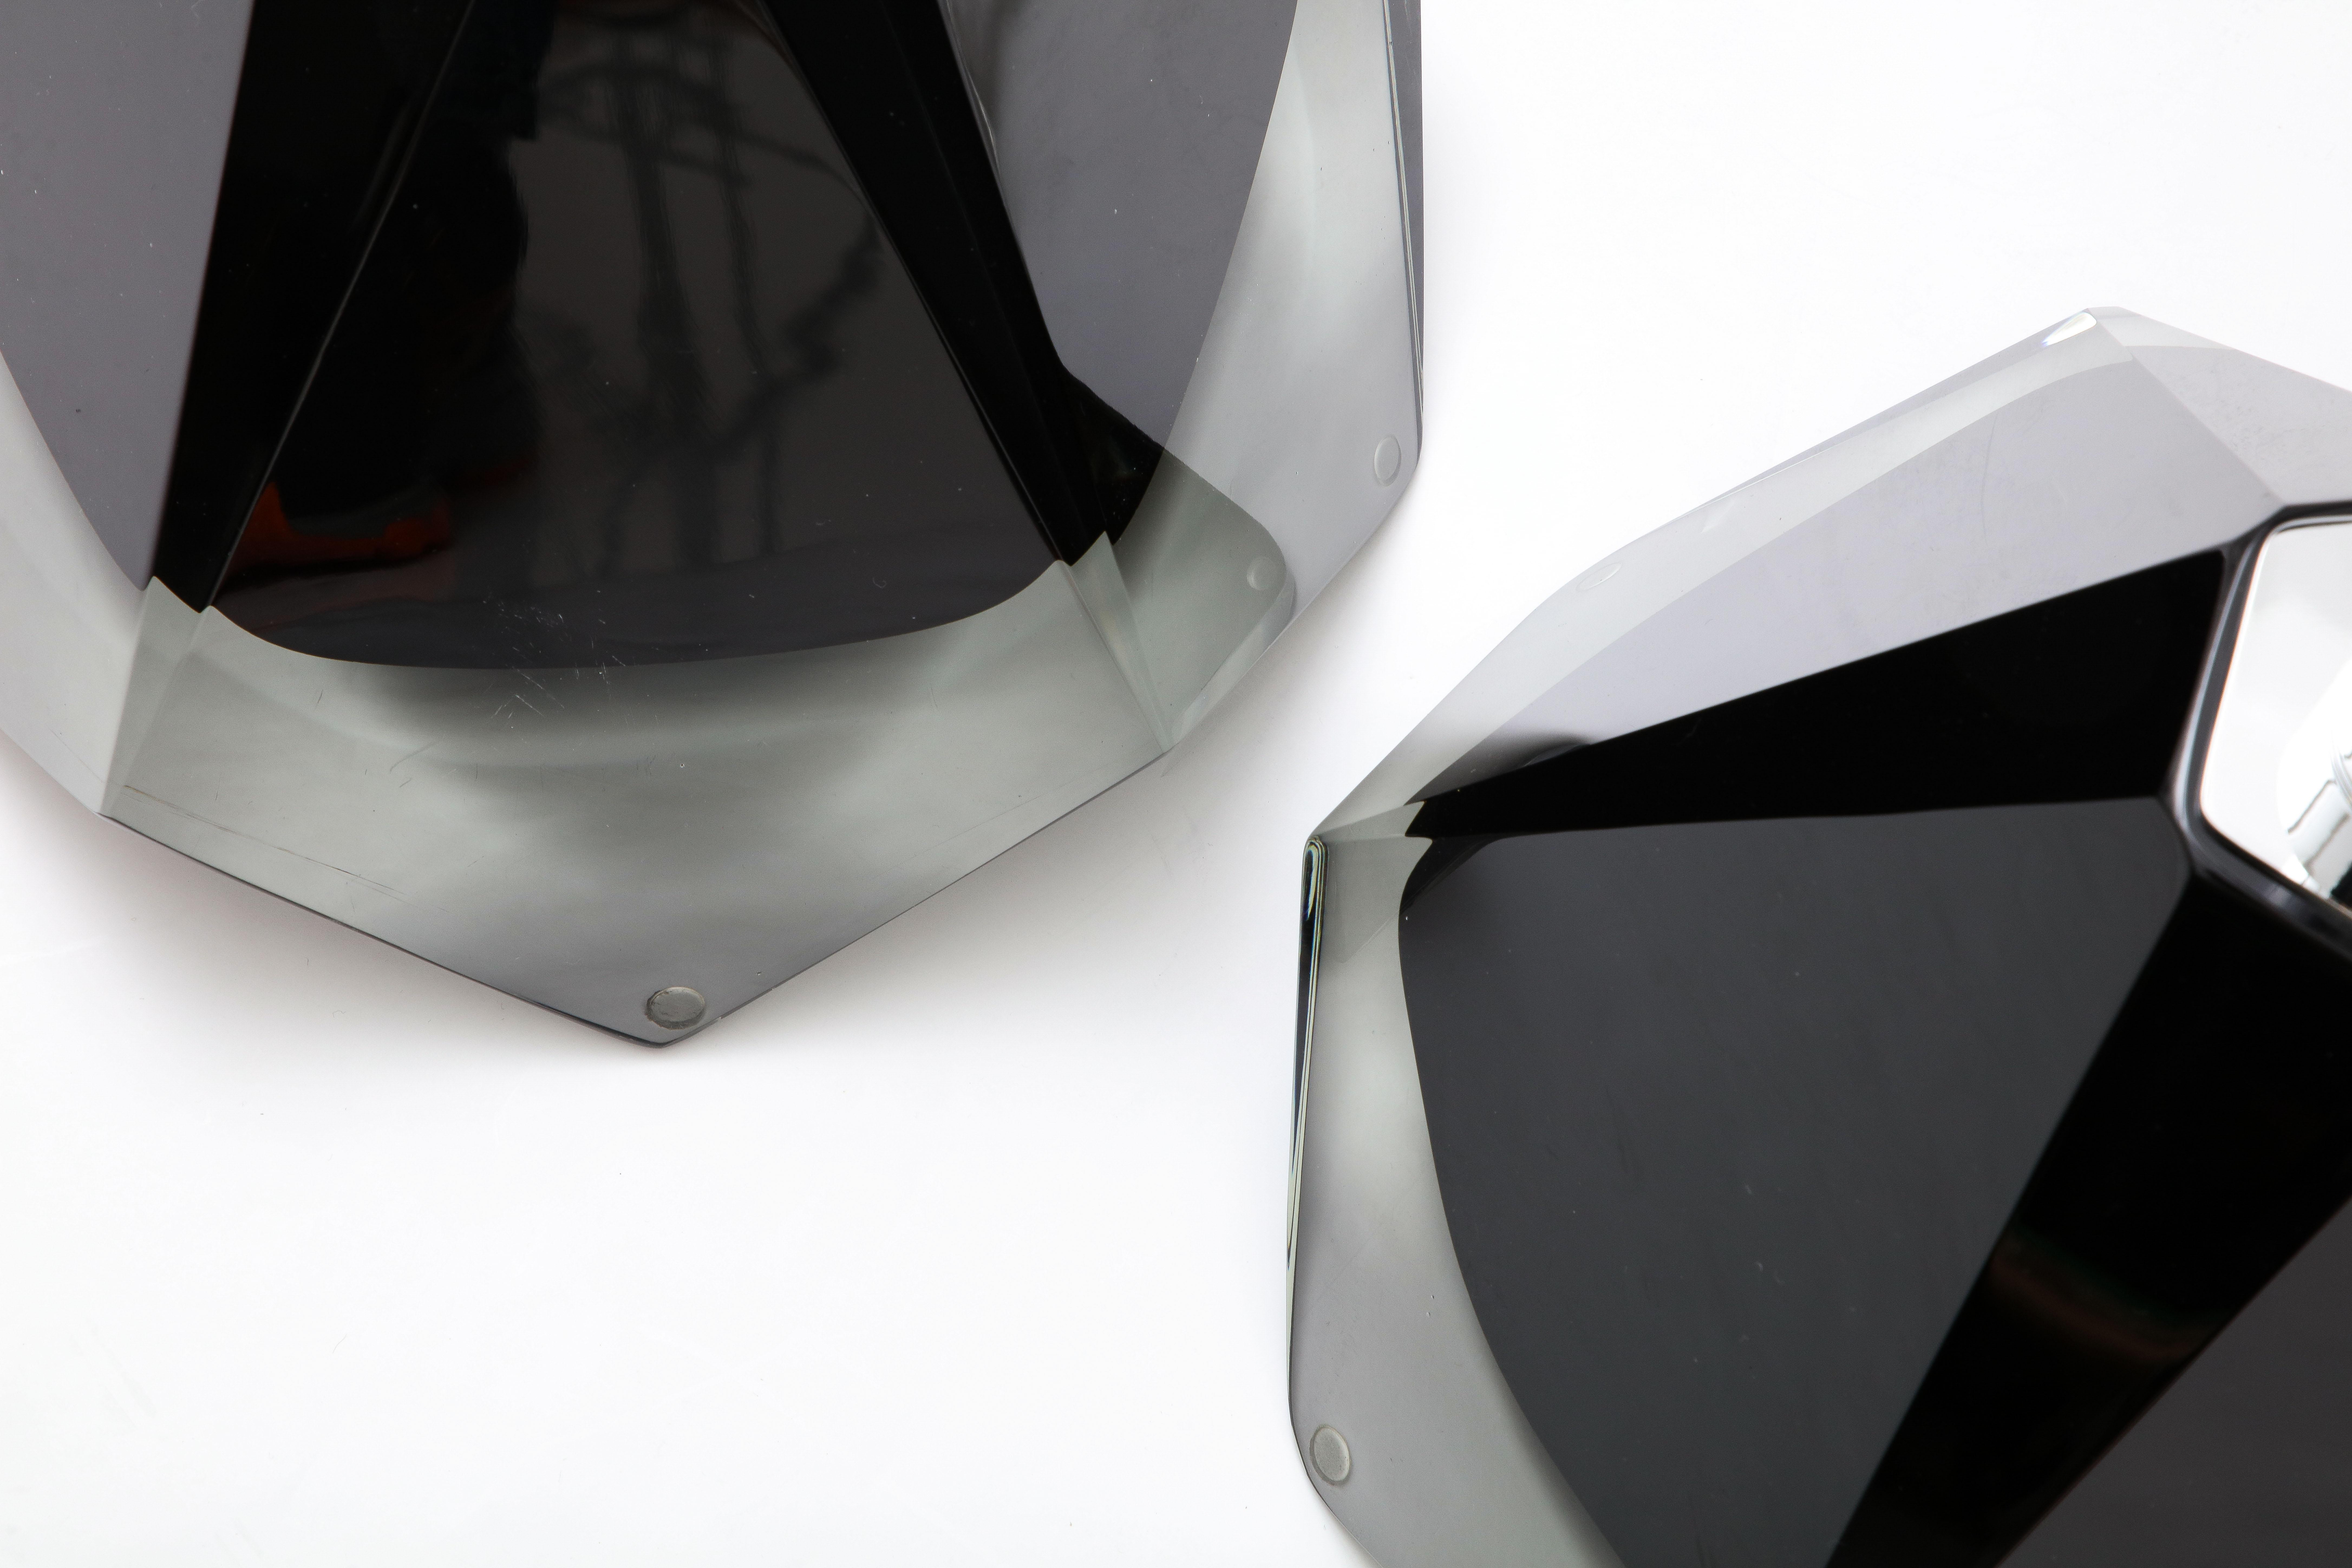 Pair of ebony black colored Murano glass lamps handcrafted by Italian master Murano Glass maker Alberto Donà. These lamps are solid and heavy and almost jewel-like with its faceted cuts throughout the glass. The design is called 